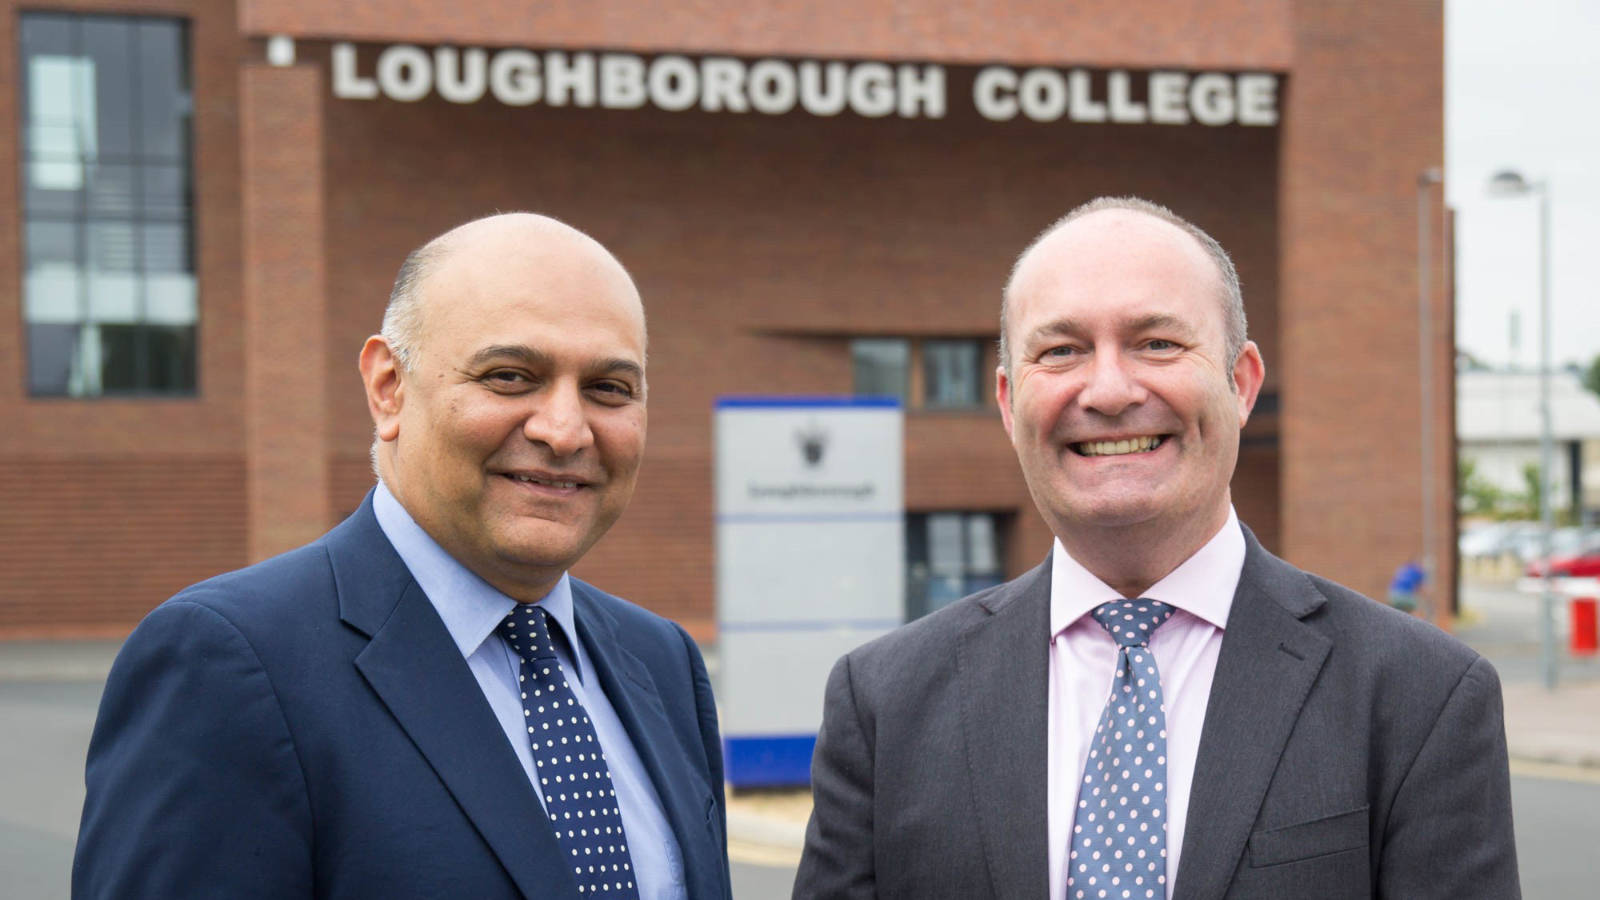 Apprenticeship programme in partnership with Loughborough College.